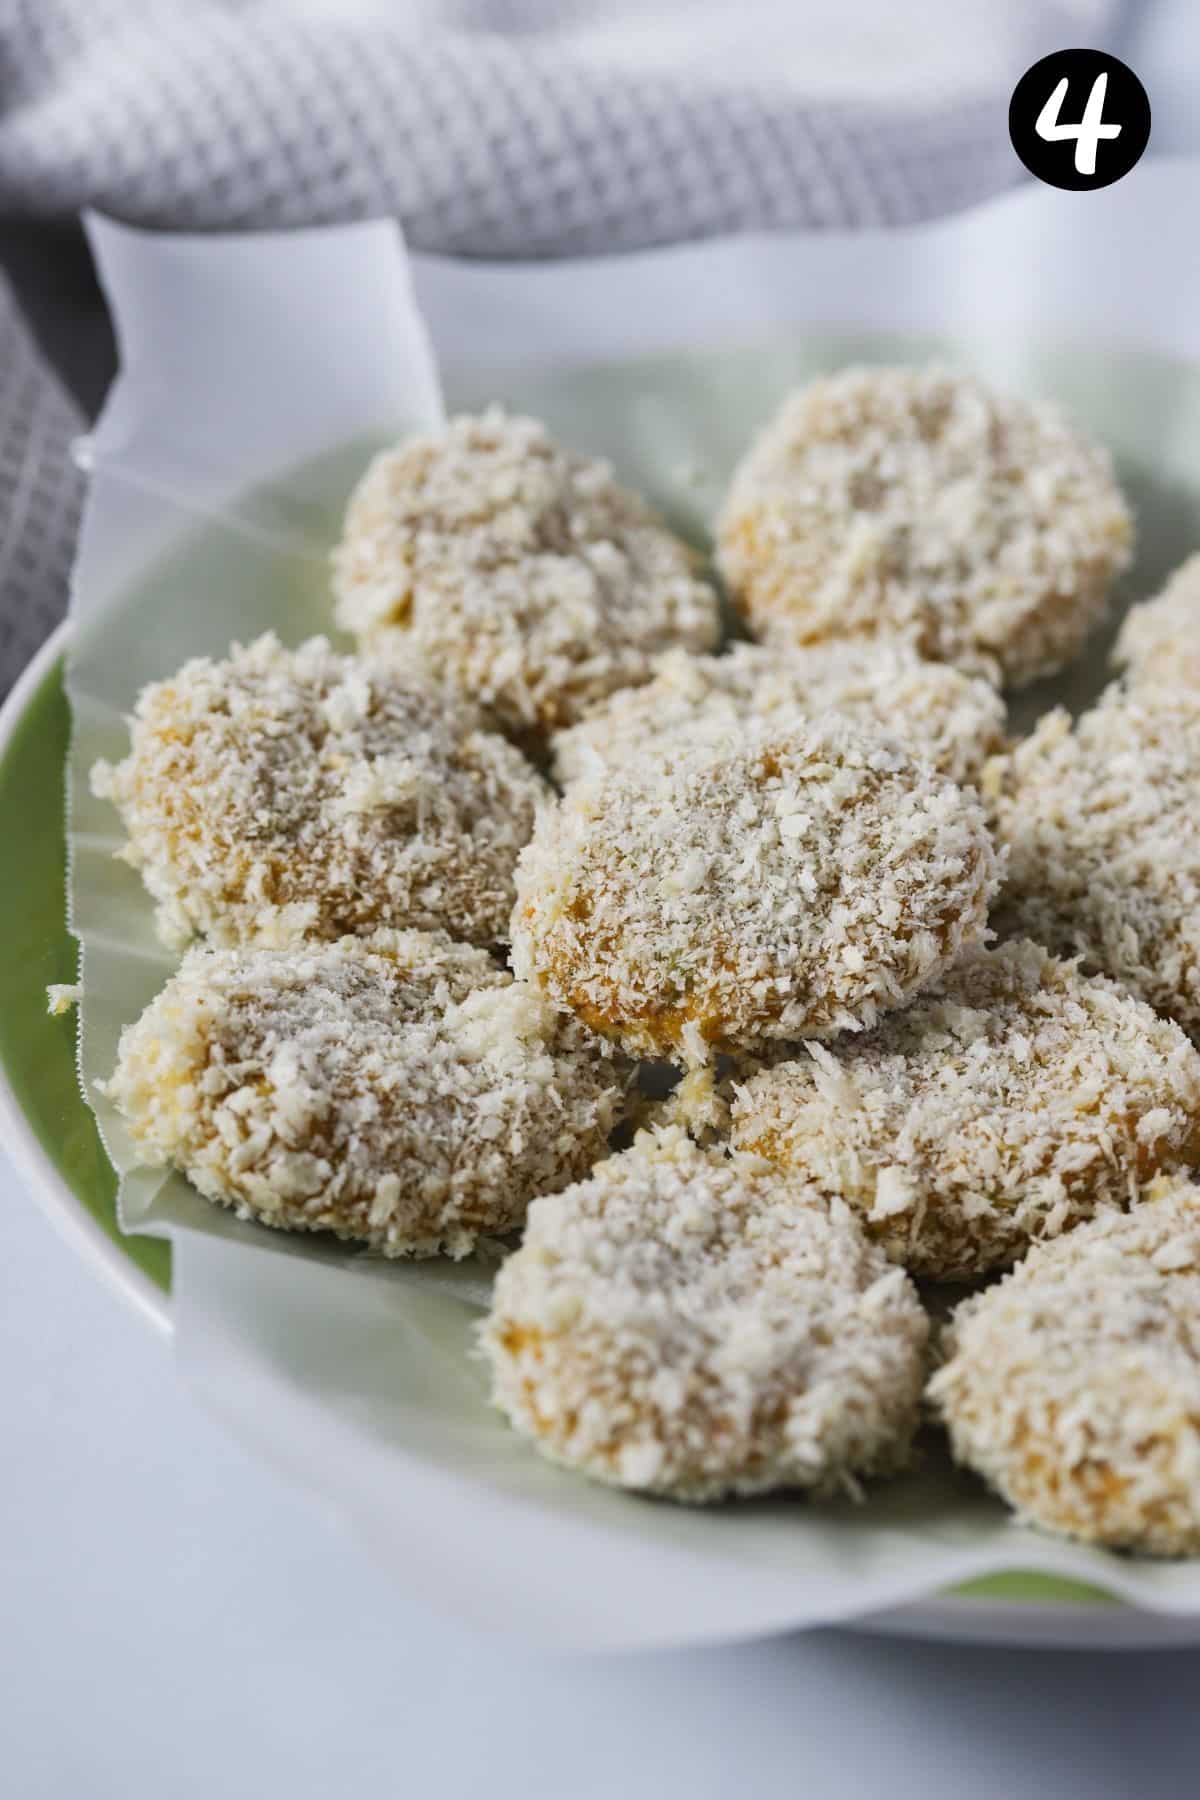 nuggets coated in panko breadcrumbs on a green plate